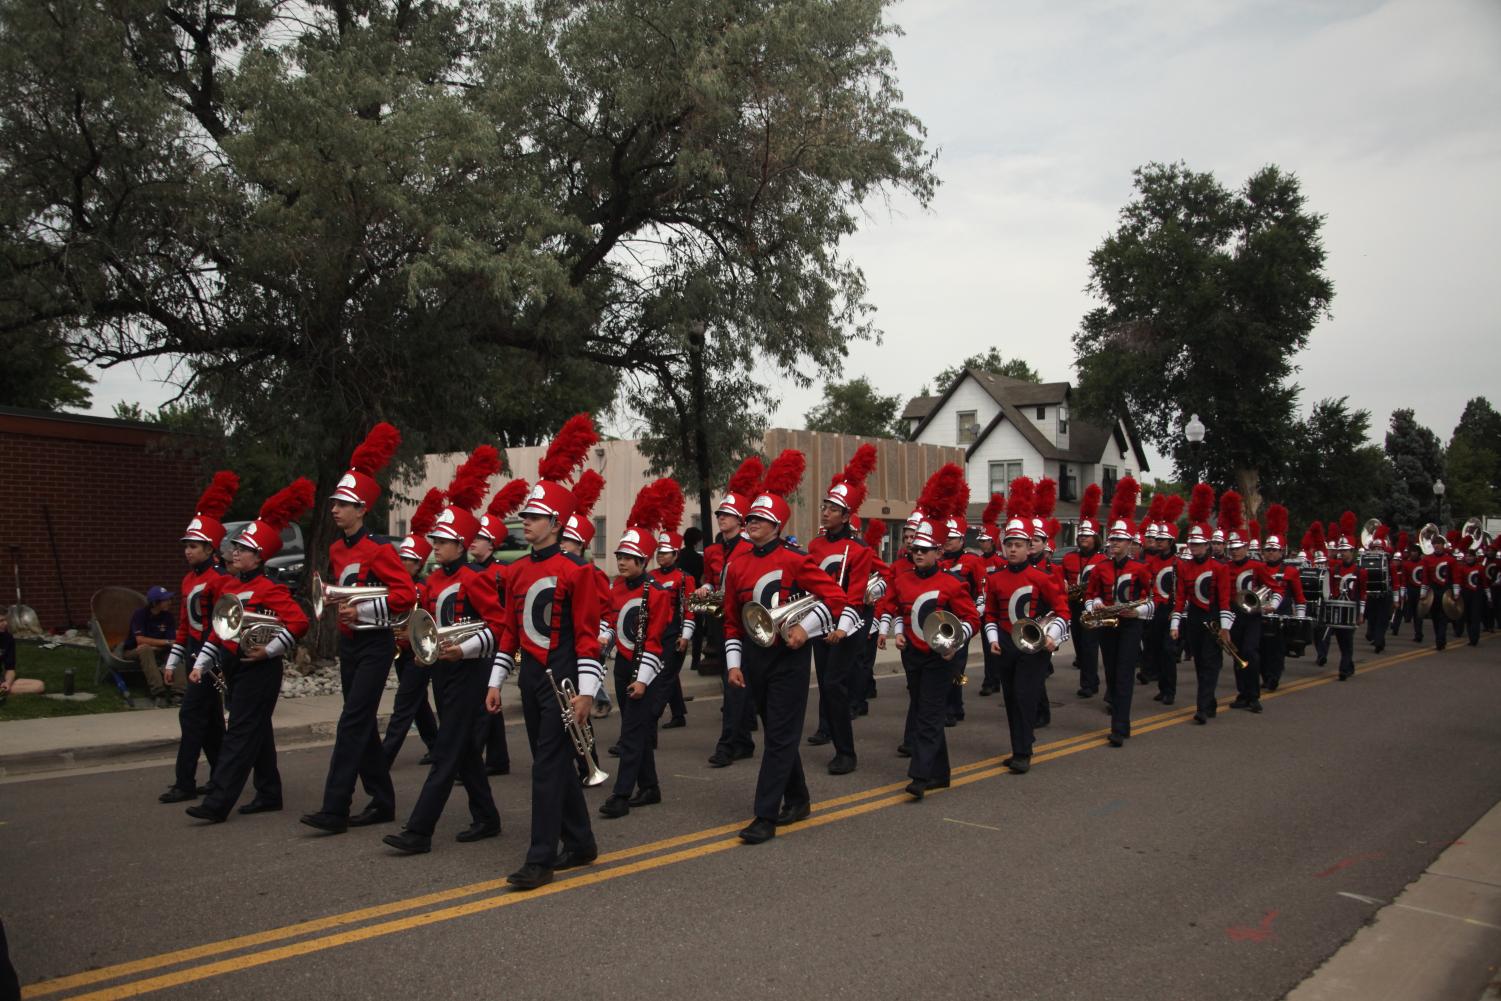 See+Moments+From+Marching+Bands+Full+Season